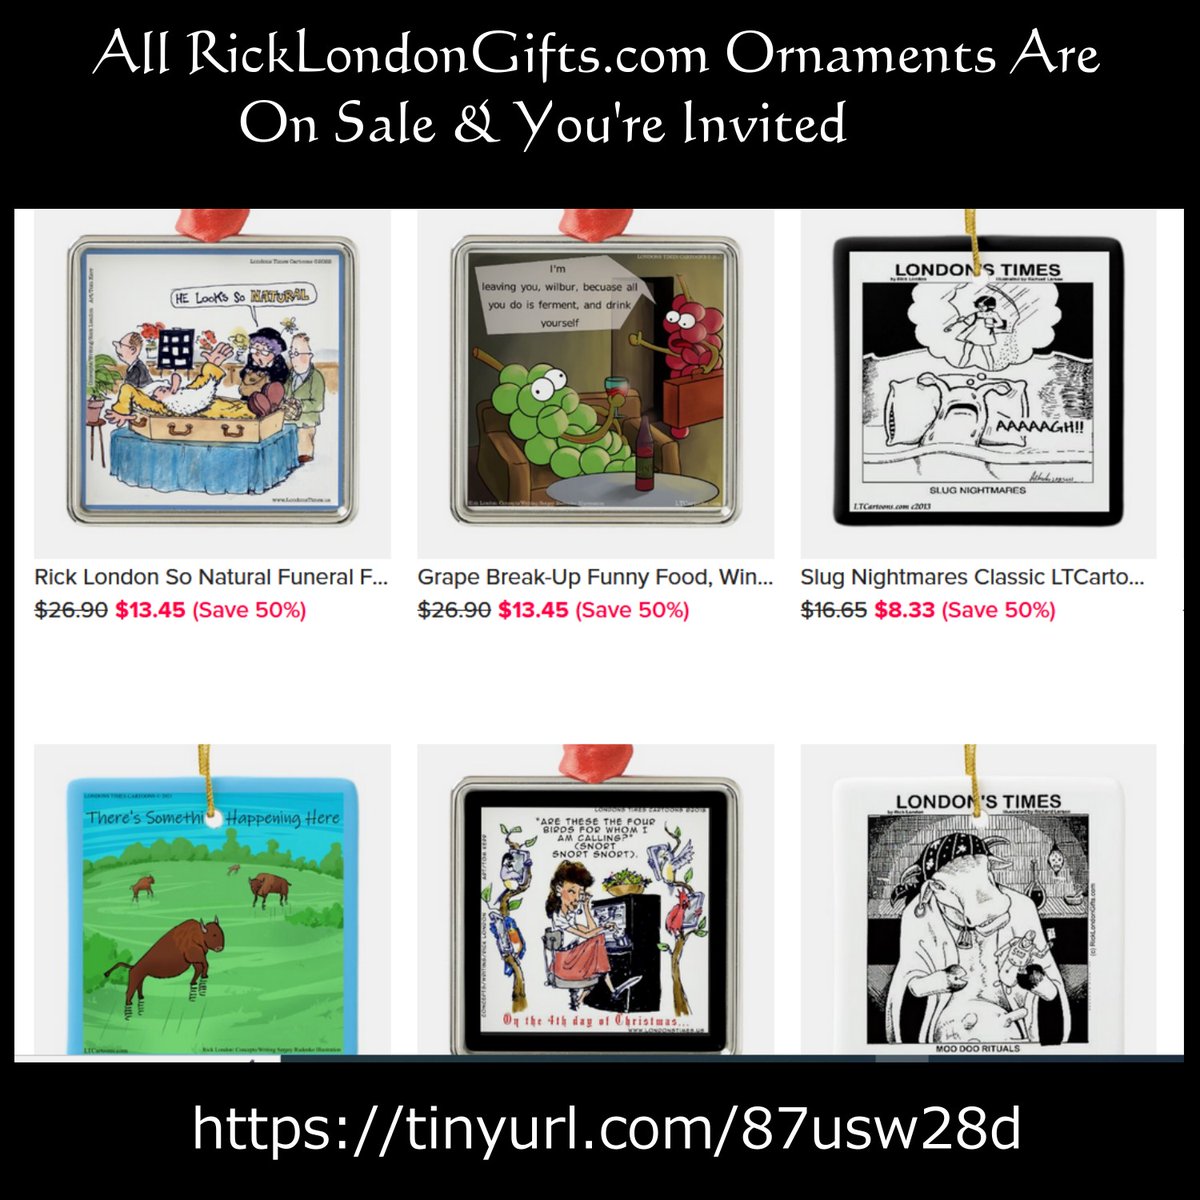 Google #1 ranked #funniest #ChristmasTree #Ornaments #discounts #deals @RickLondon #Gifts #freepersonalization #shipsworldwide #funnygifts Google #1 ranked #offbeat #cartoon #Shop from #comfort of ur #home @zazzle #humor #guaranteed tinyurl.com/87usw28d